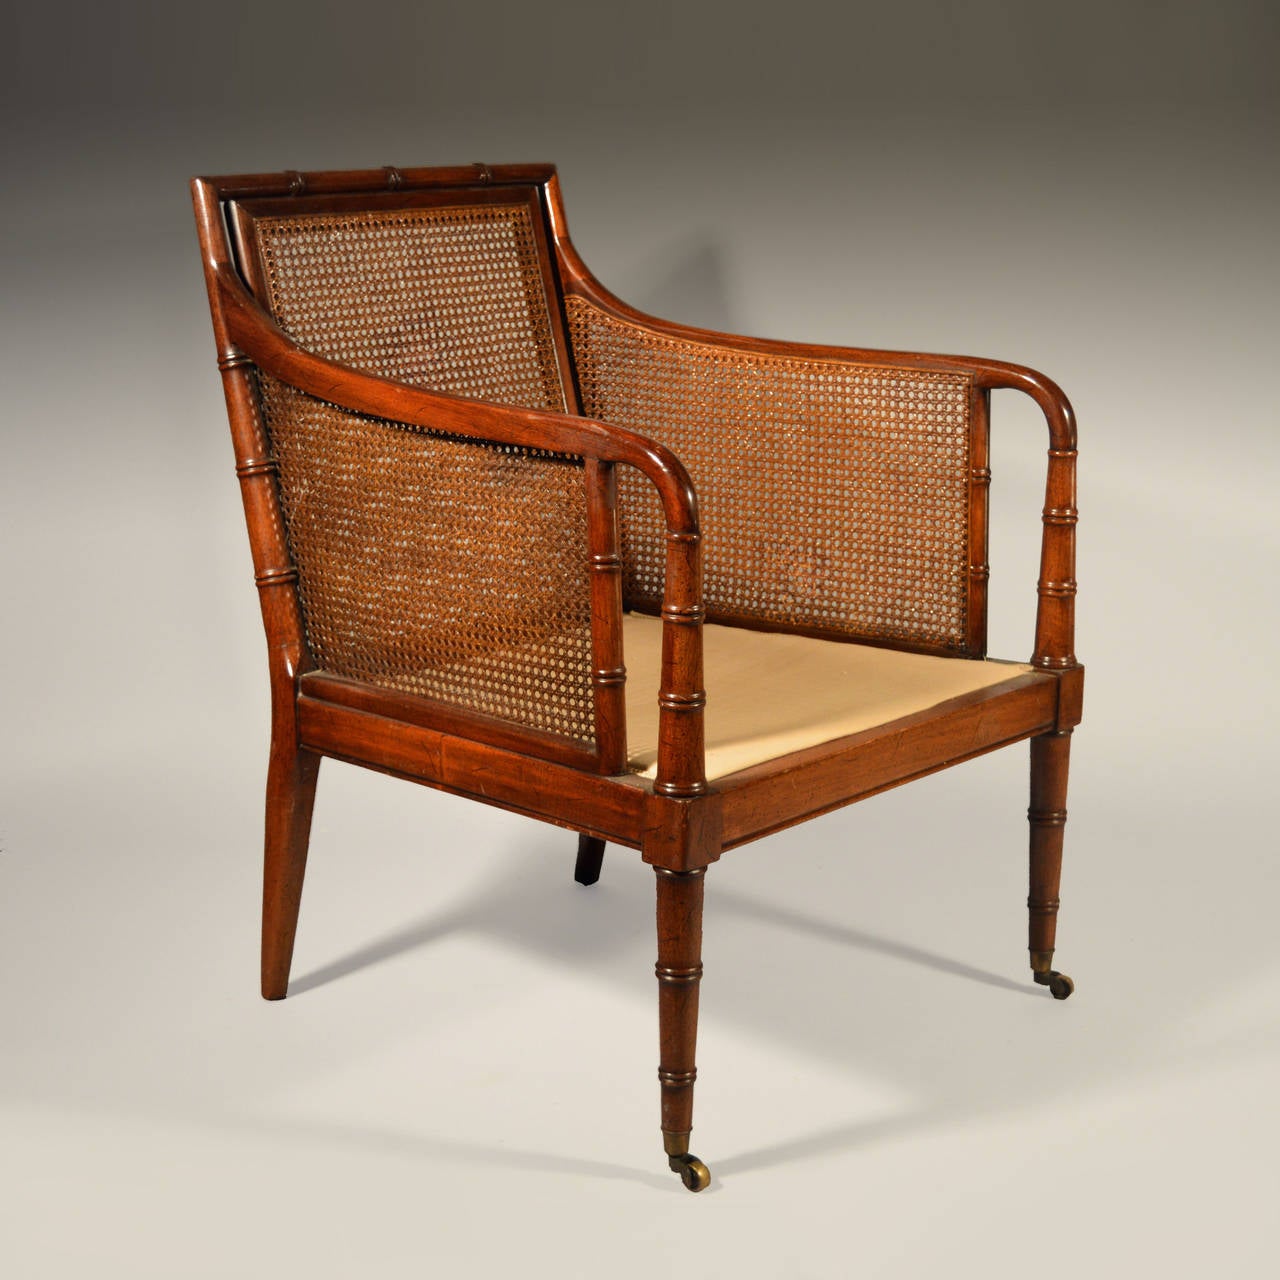 An early 20th century mahogany library chair with bamboo simulated frame, with deep seat and legs terminating in brass castors.